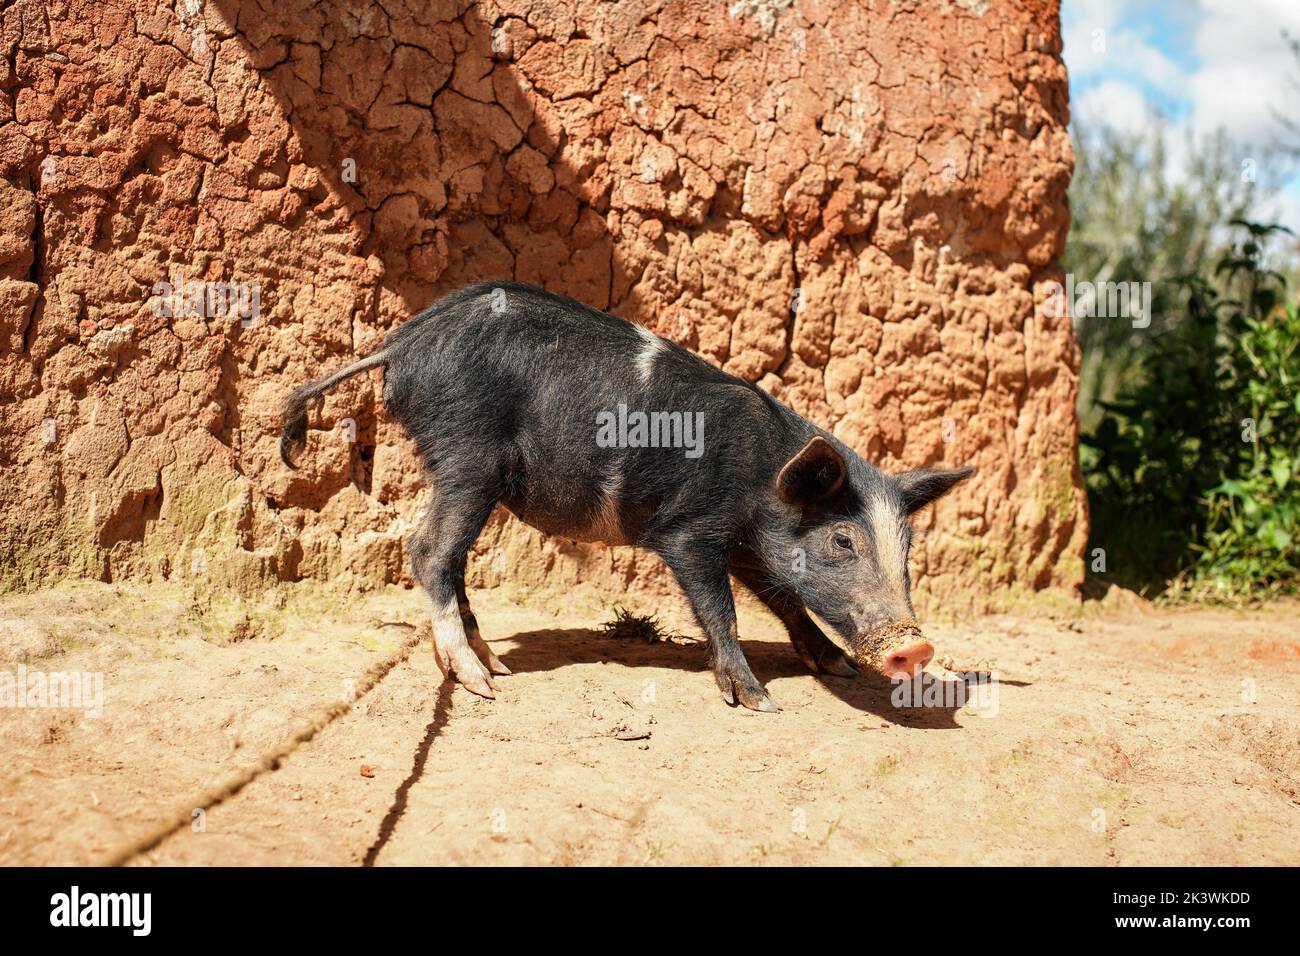 Small black piglet standing on dirt ground next to house wall, leg secured with rope Stock Photo